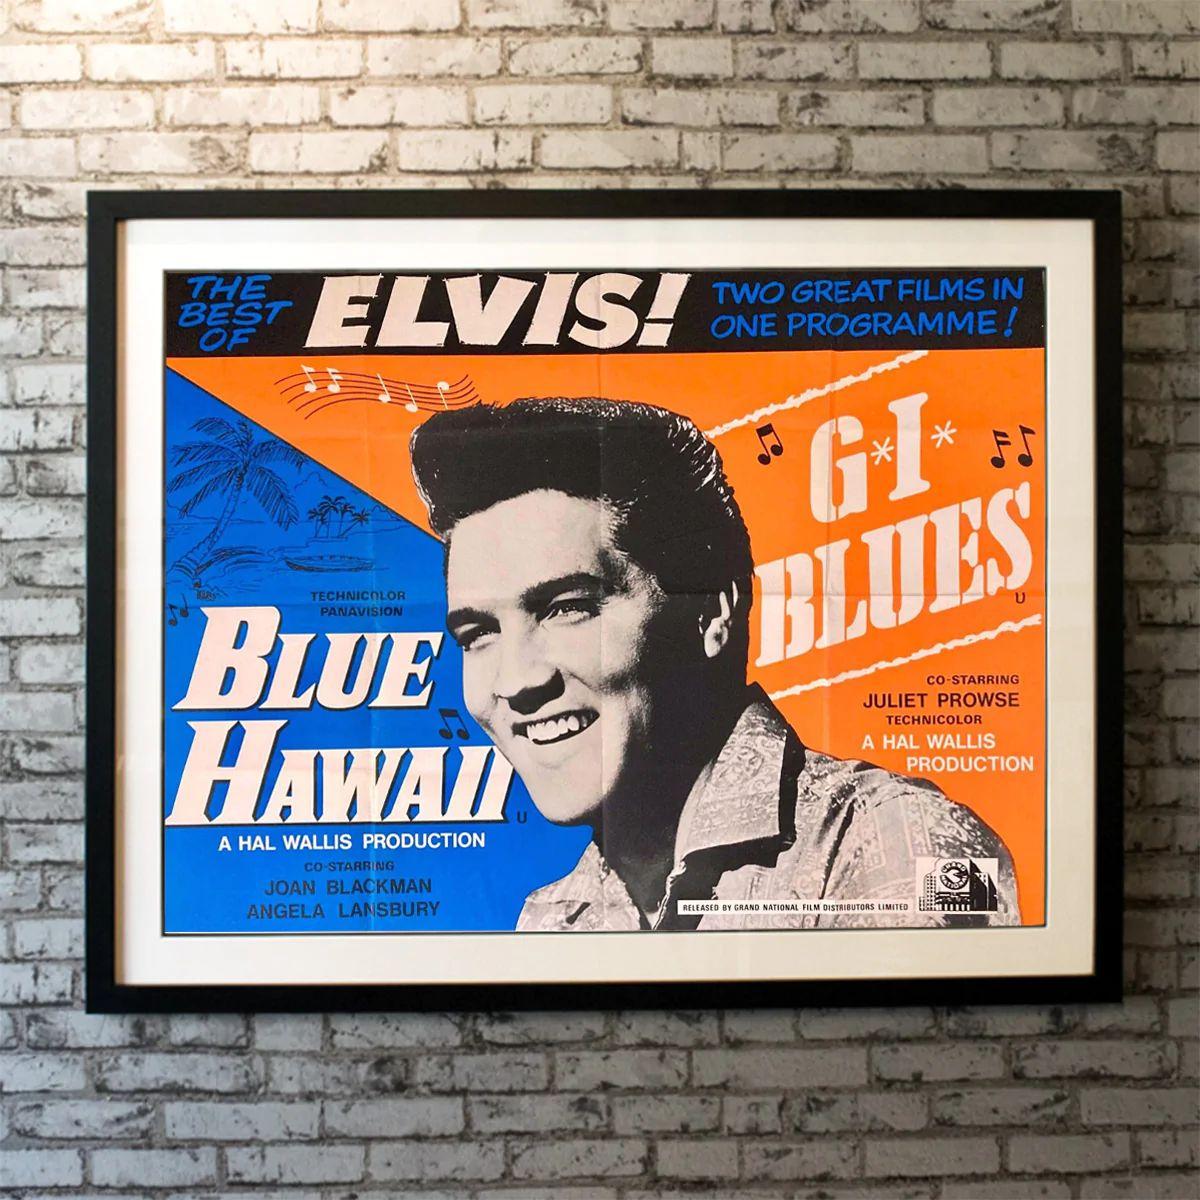 Blue Hawaii / G.I. Blues, unframed poster, 1961

Original British Quad (30 X 40 Inches). A double feature starring Elvis Presley for Blue Hawaii and G.I. Blues.

Year: 1961
Nationality: United Kingdom
Condition: Folded
Type: Original British